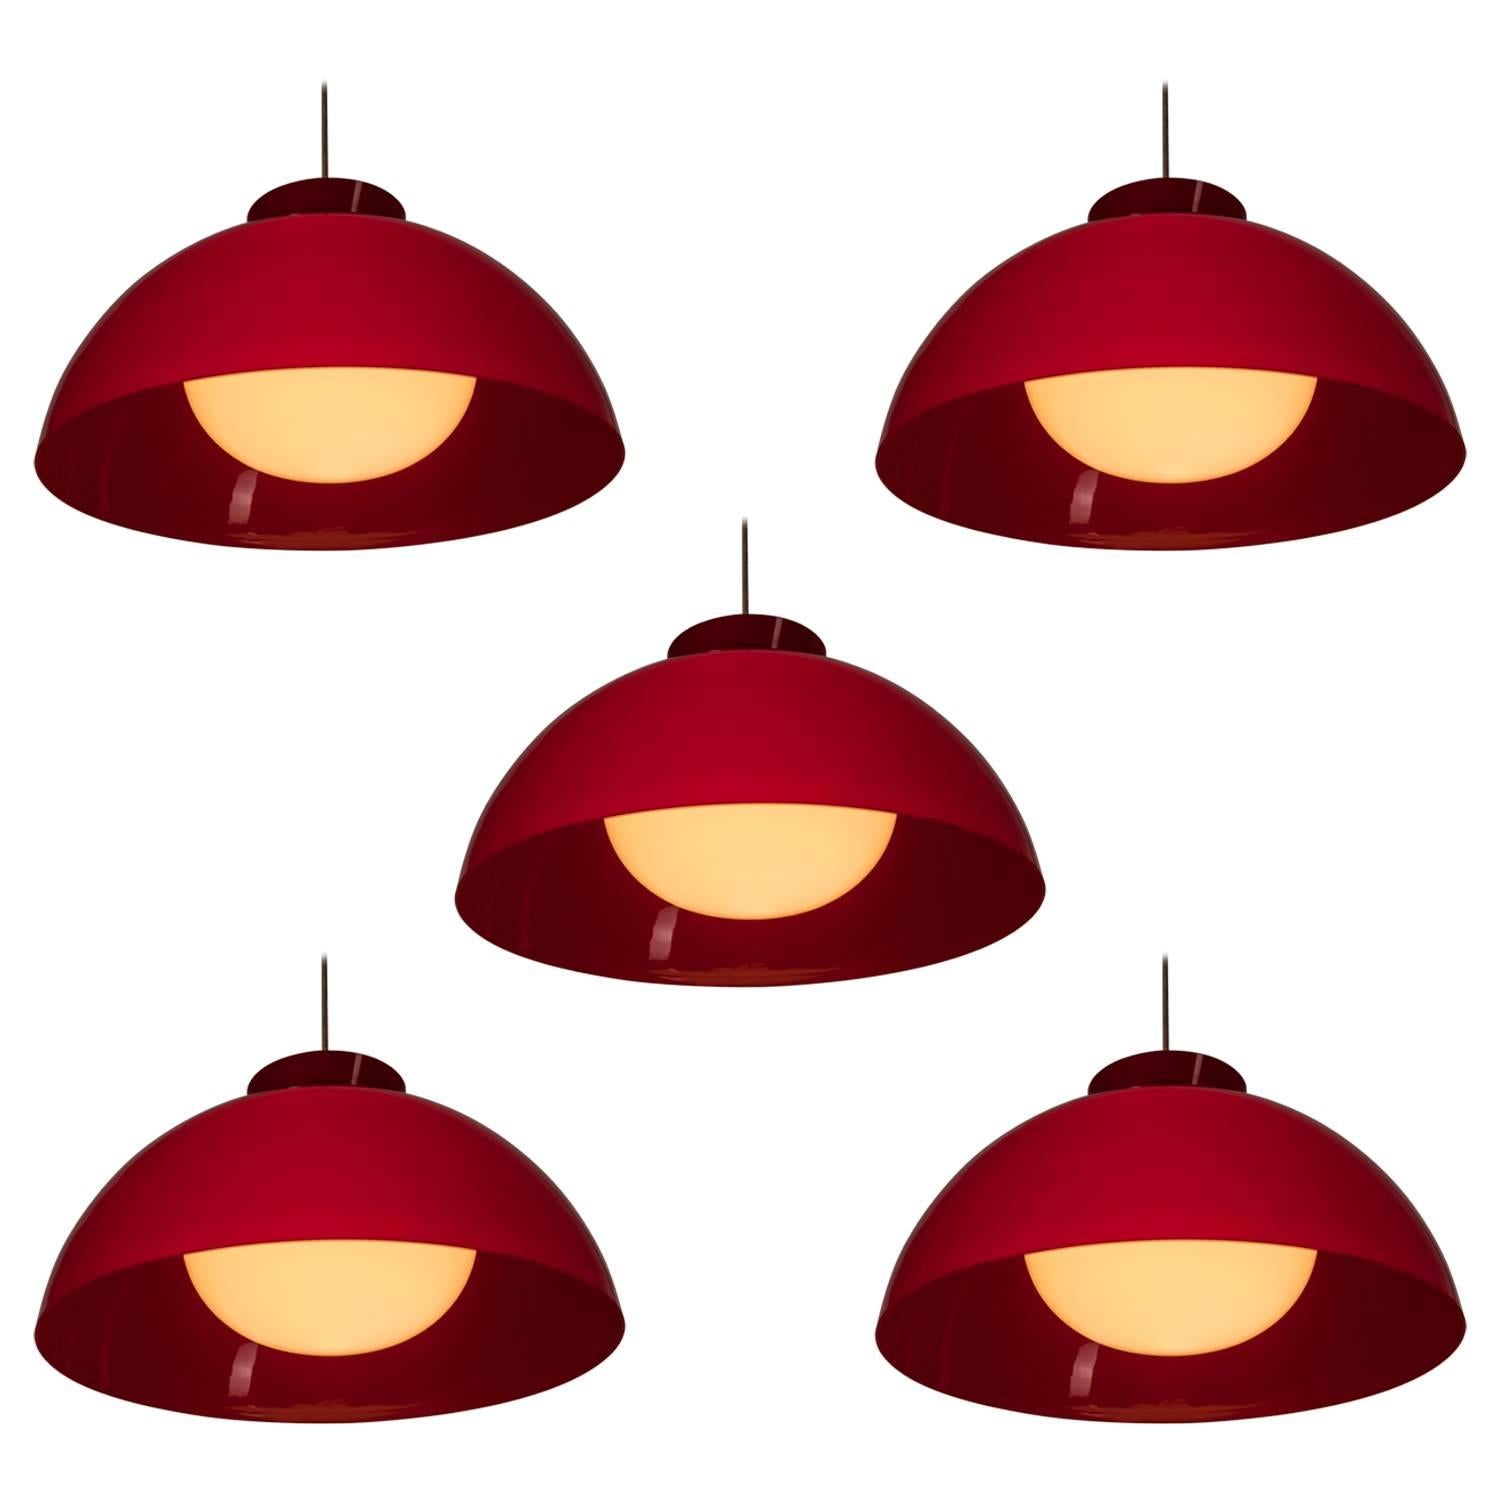 Set of Five "KD 6" Pendant Lamps by Castiglioni for Kartell